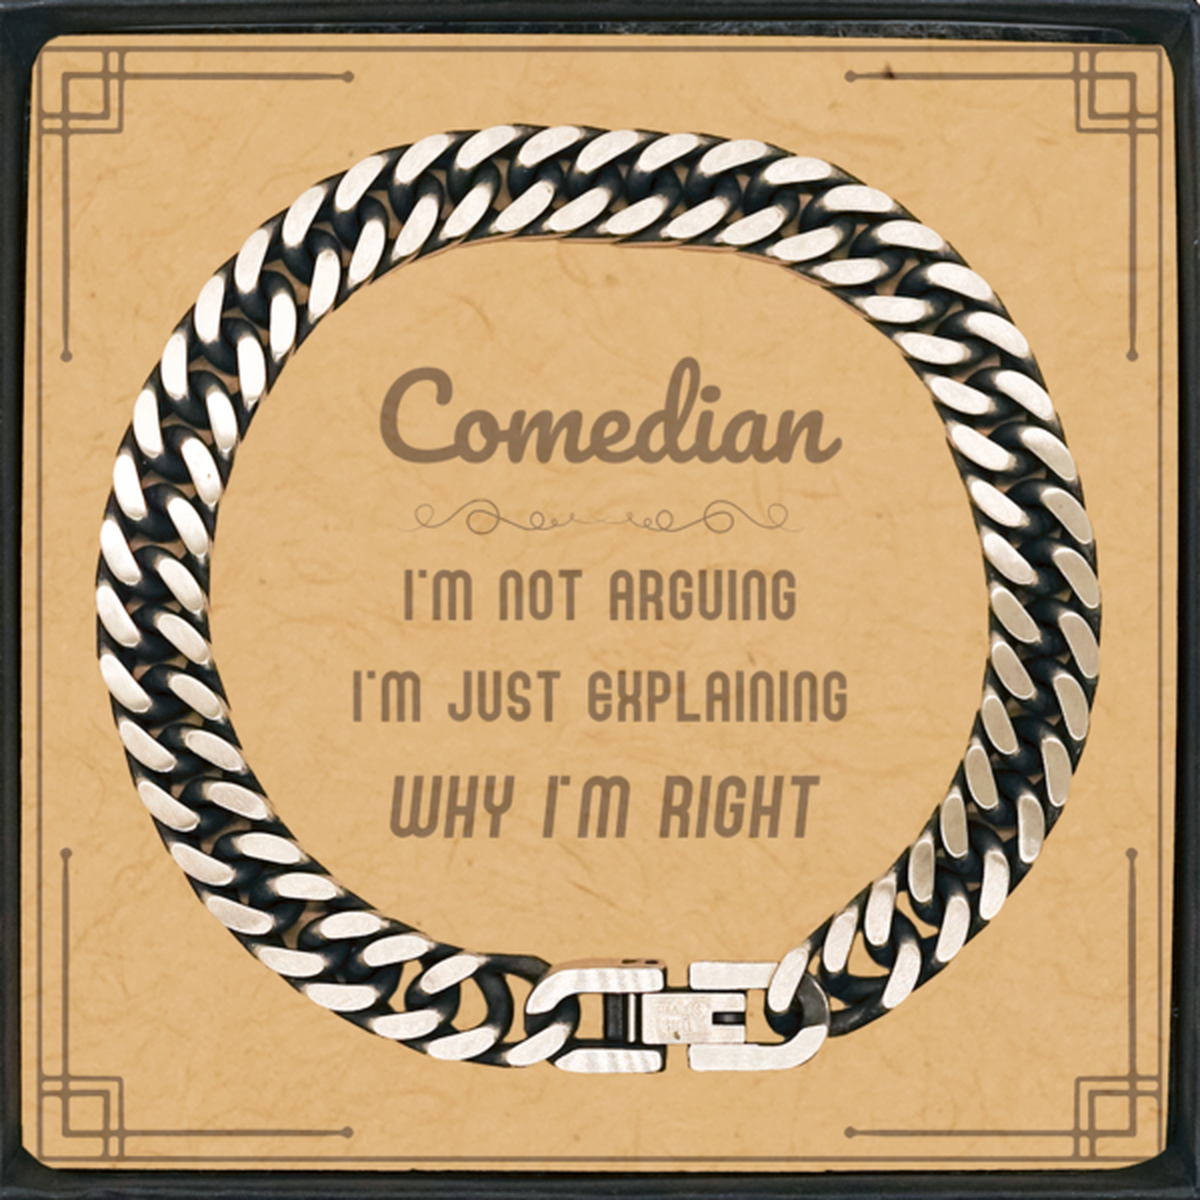 Comedian I'm not Arguing. I'm Just Explaining Why I'm RIGHT Cuban Link Chain Bracelet, Funny Saying Quote Comedian Gifts For Comedian Message Card Graduation Birthday Christmas Gifts for Men Women Coworker